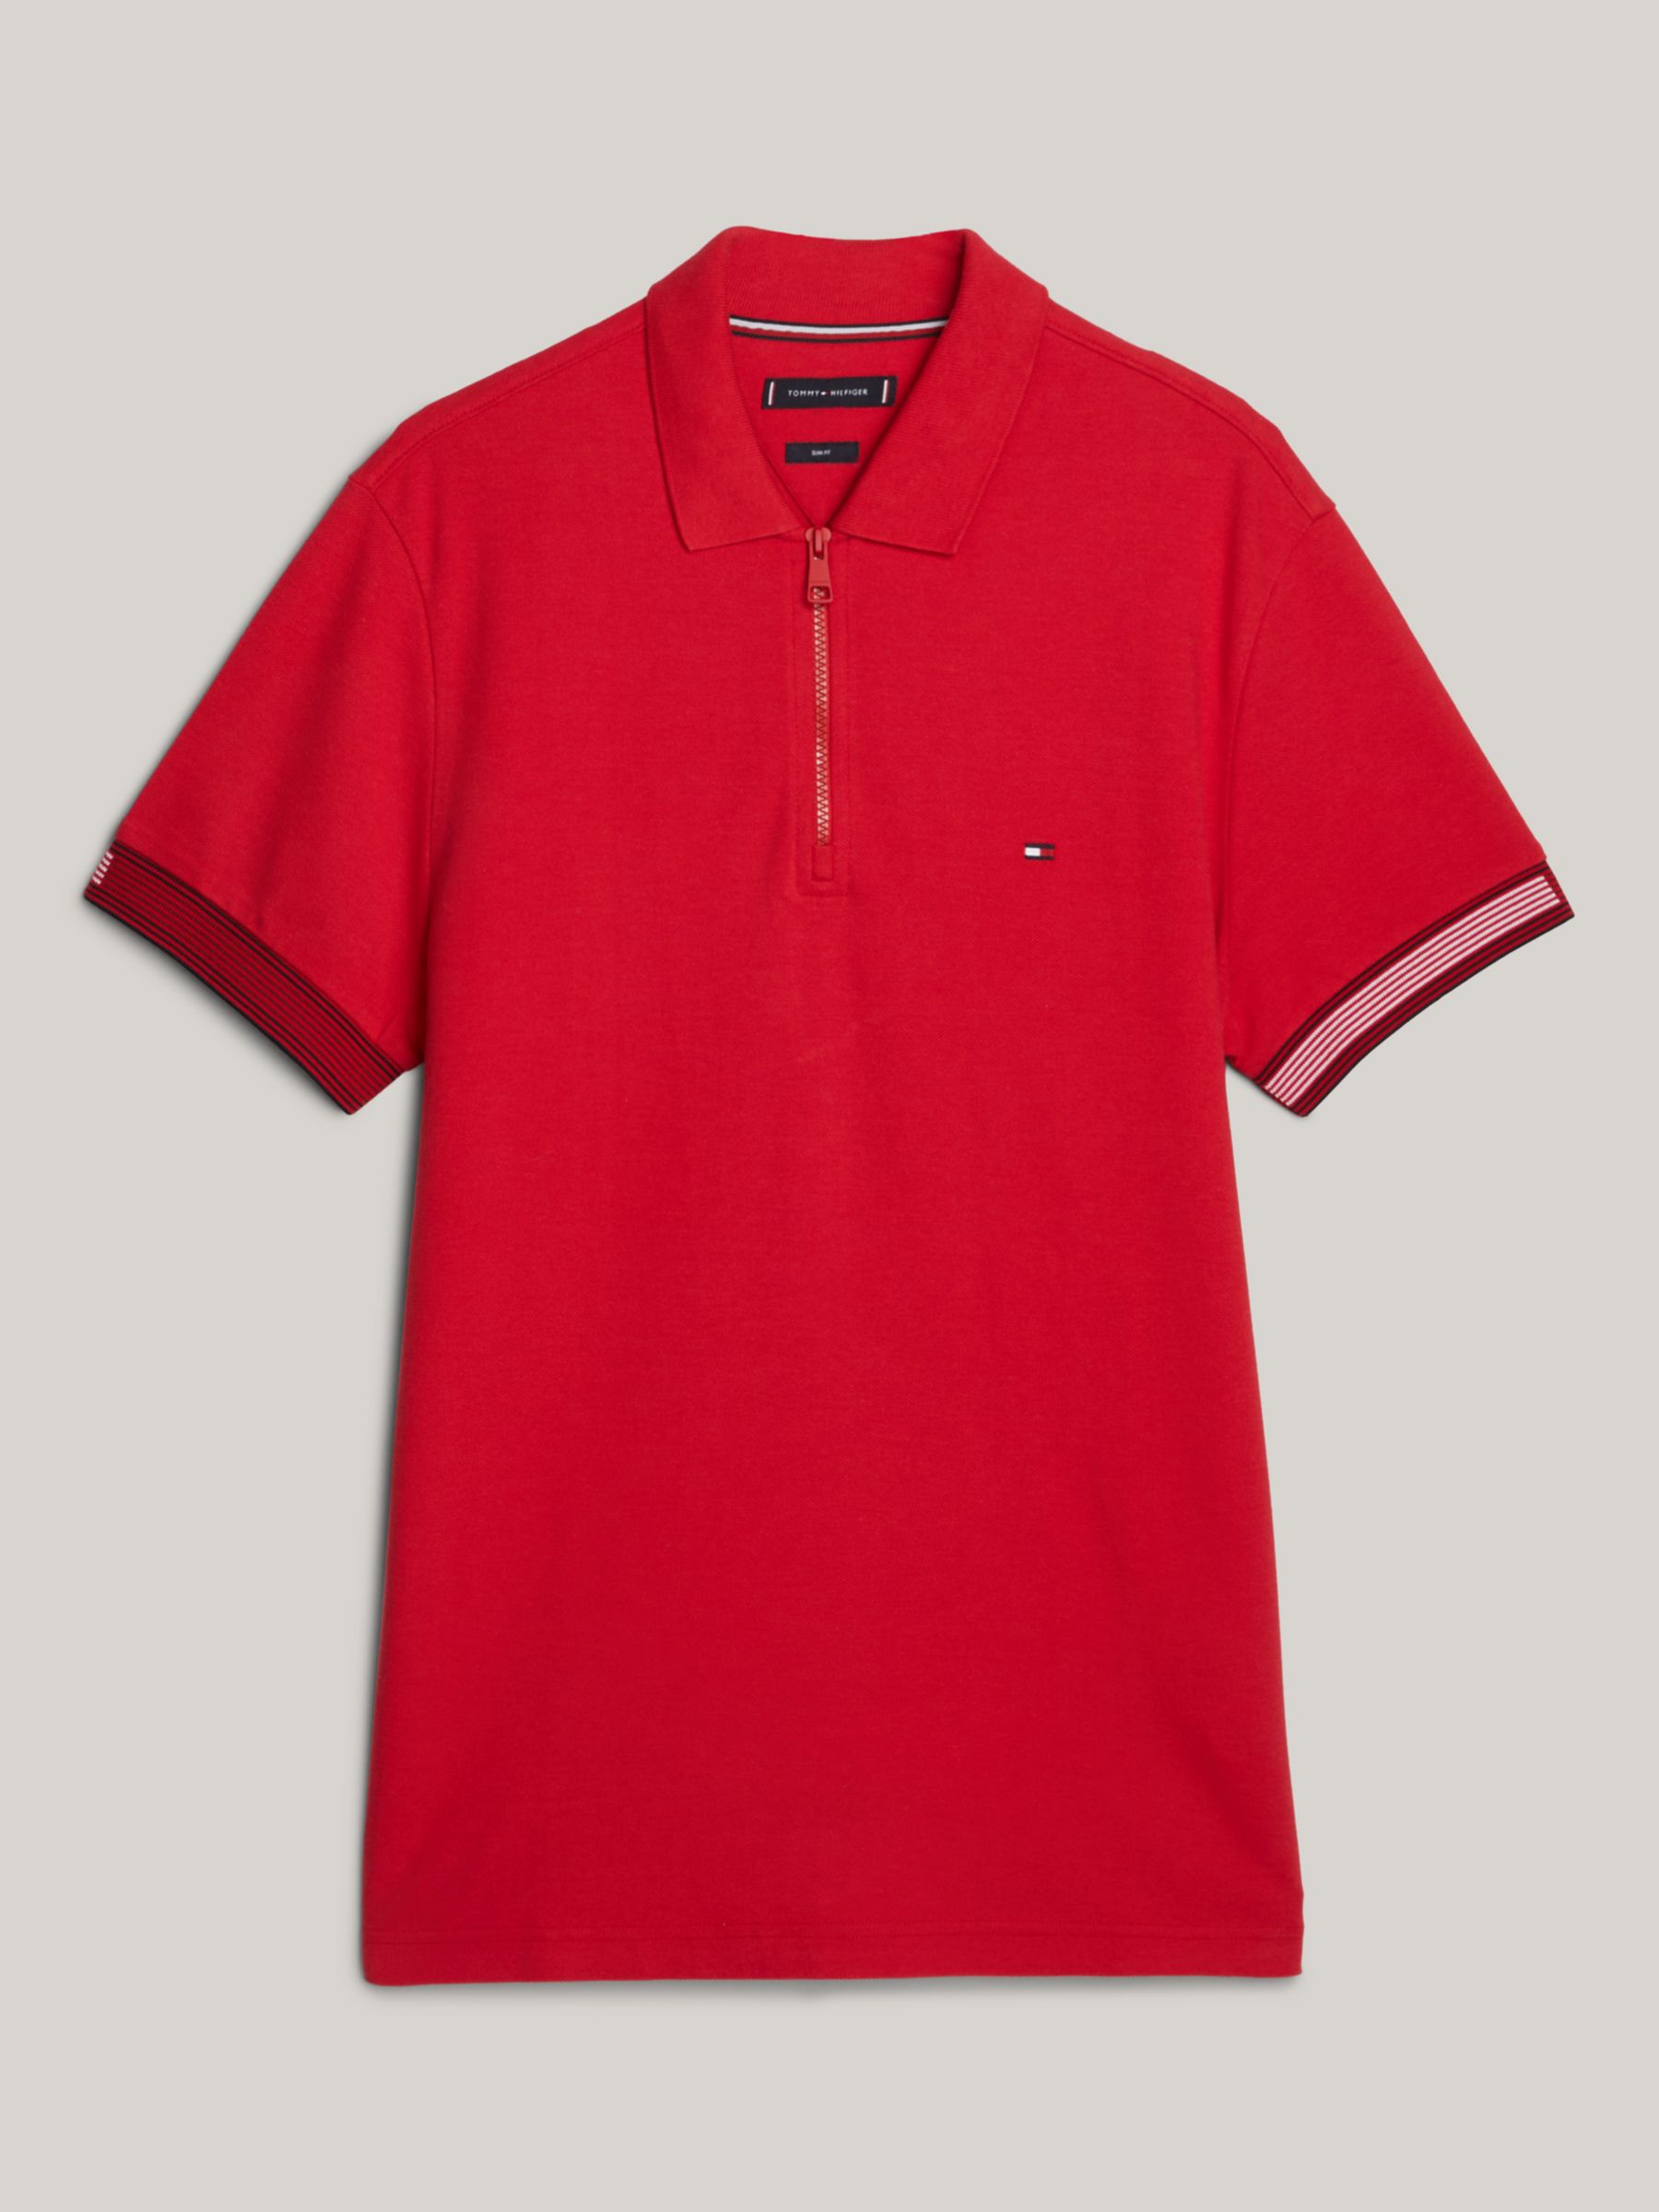 Tommy Hilfiger Adaptive Organic Cotton Blend Slim Fit Polo Shirt, Primary Red, XL